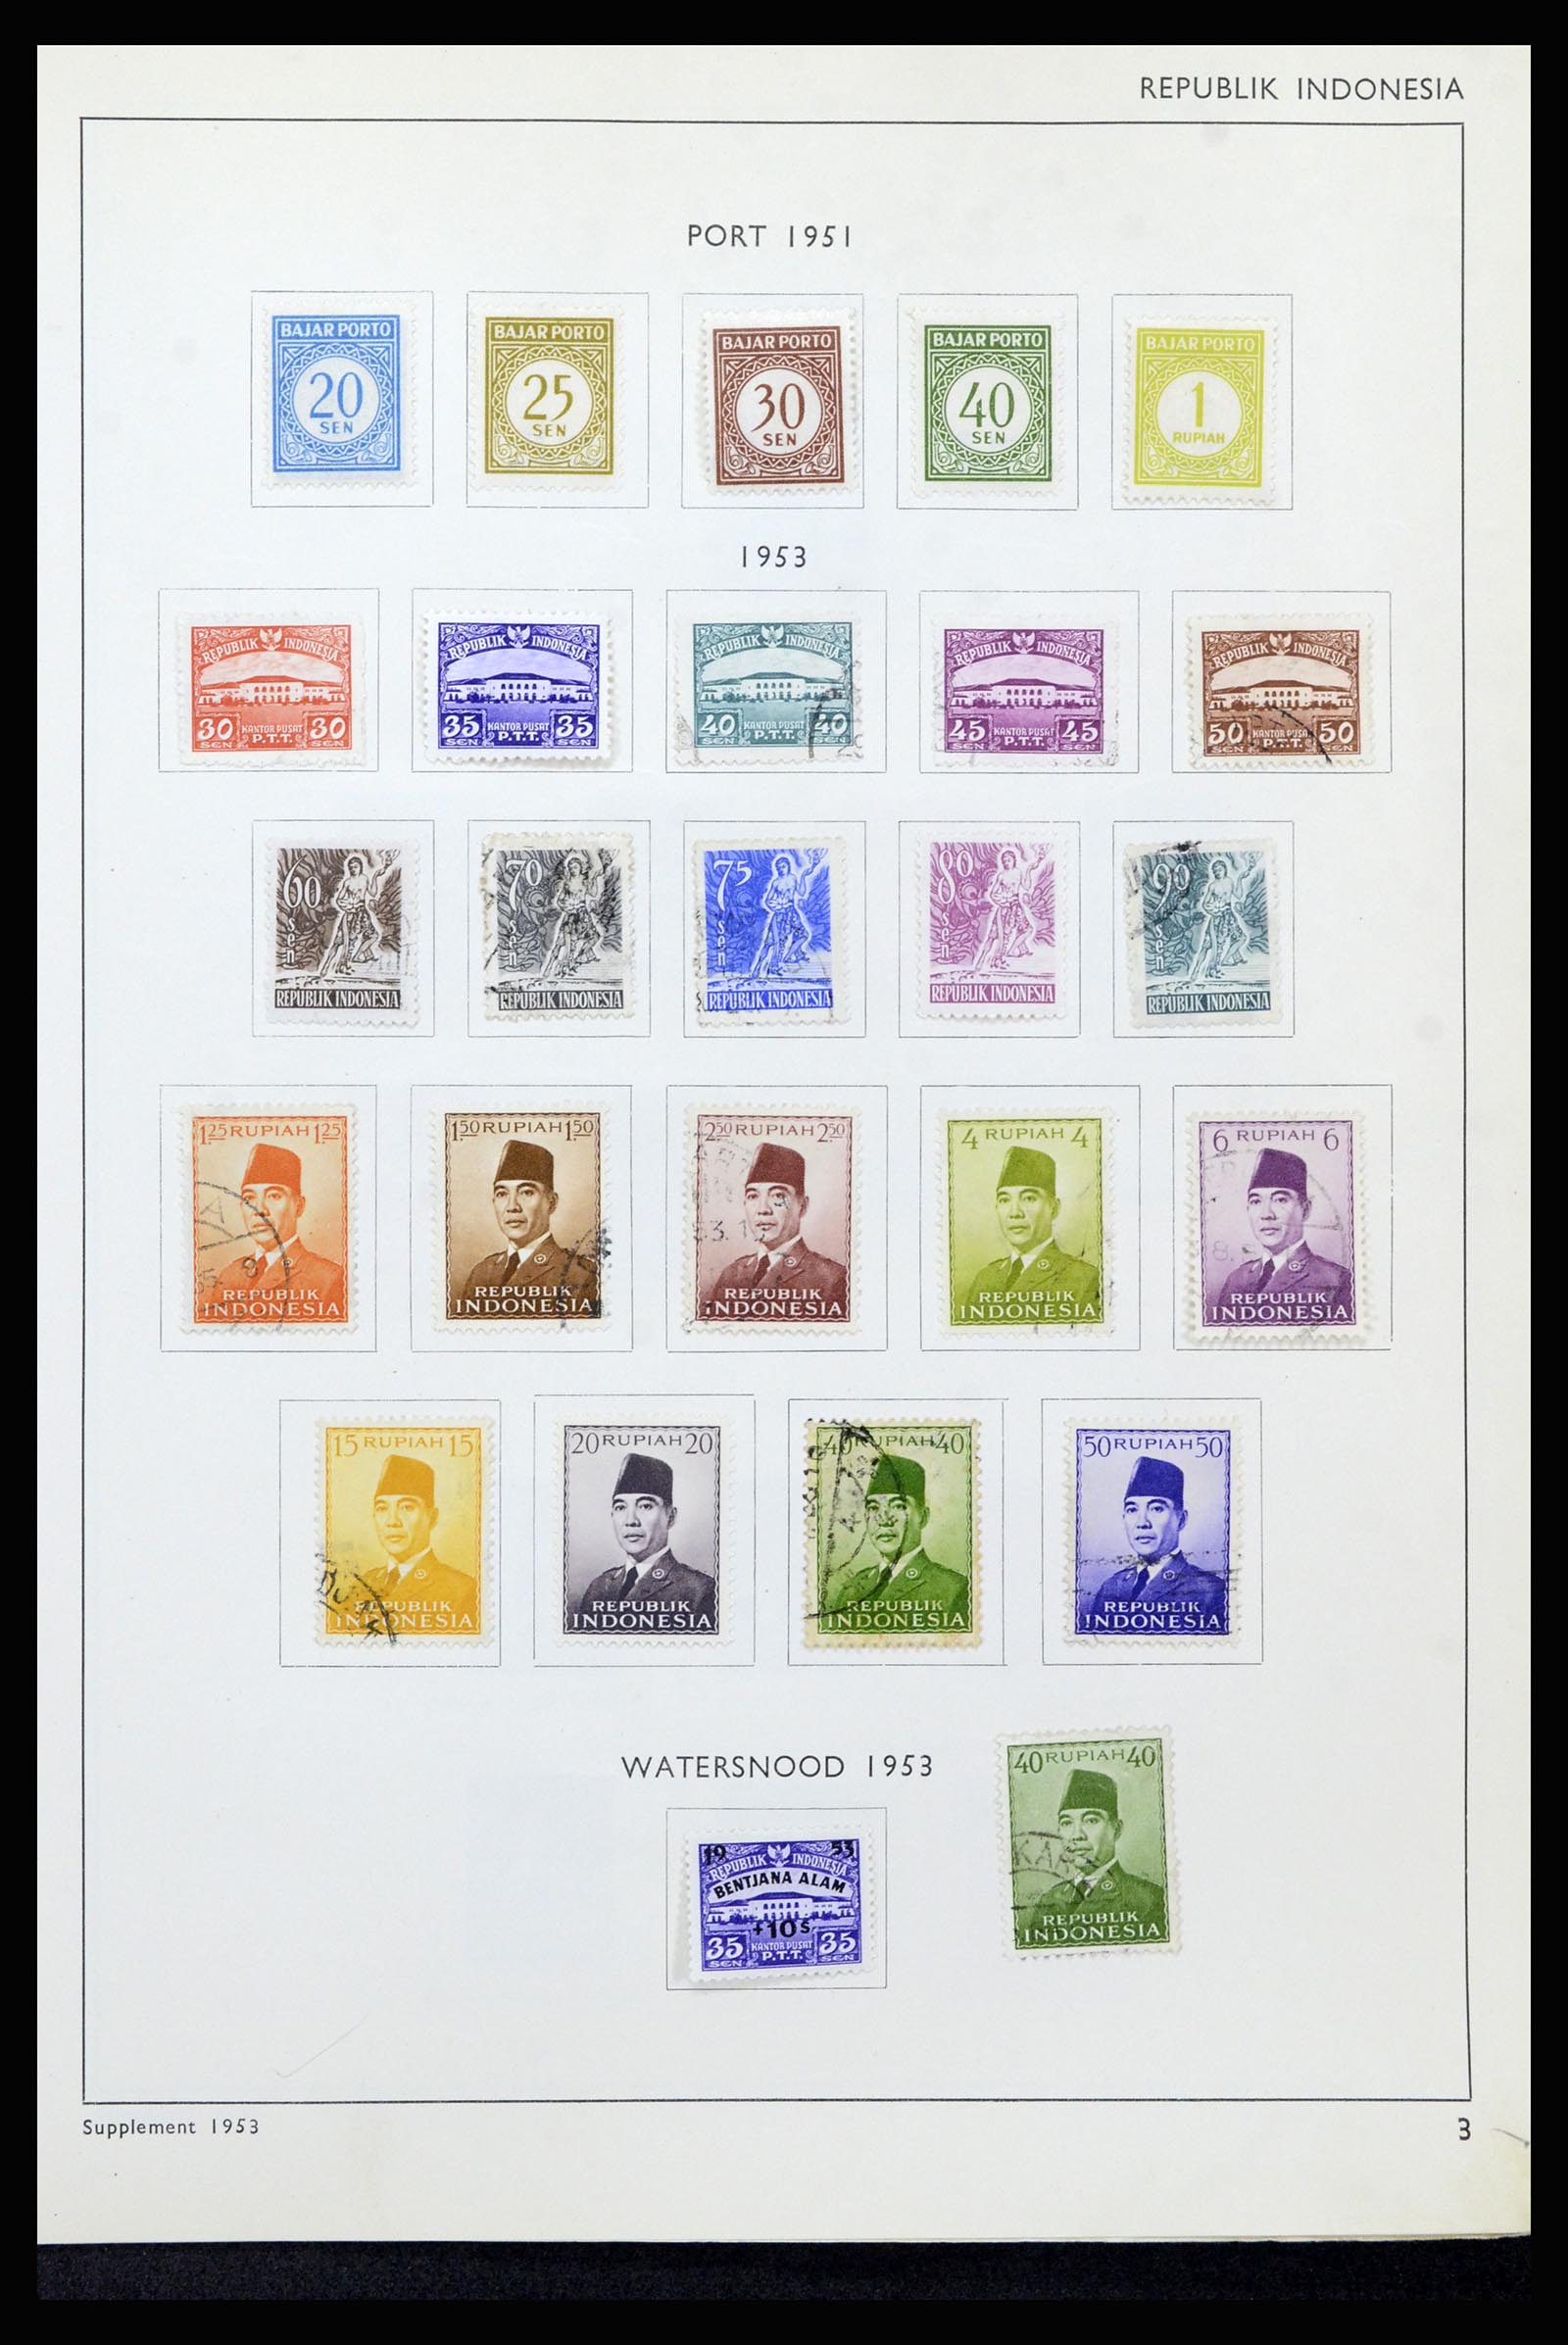 37217 024 - Stamp collection 37217 Dutch territories 1864-1975.